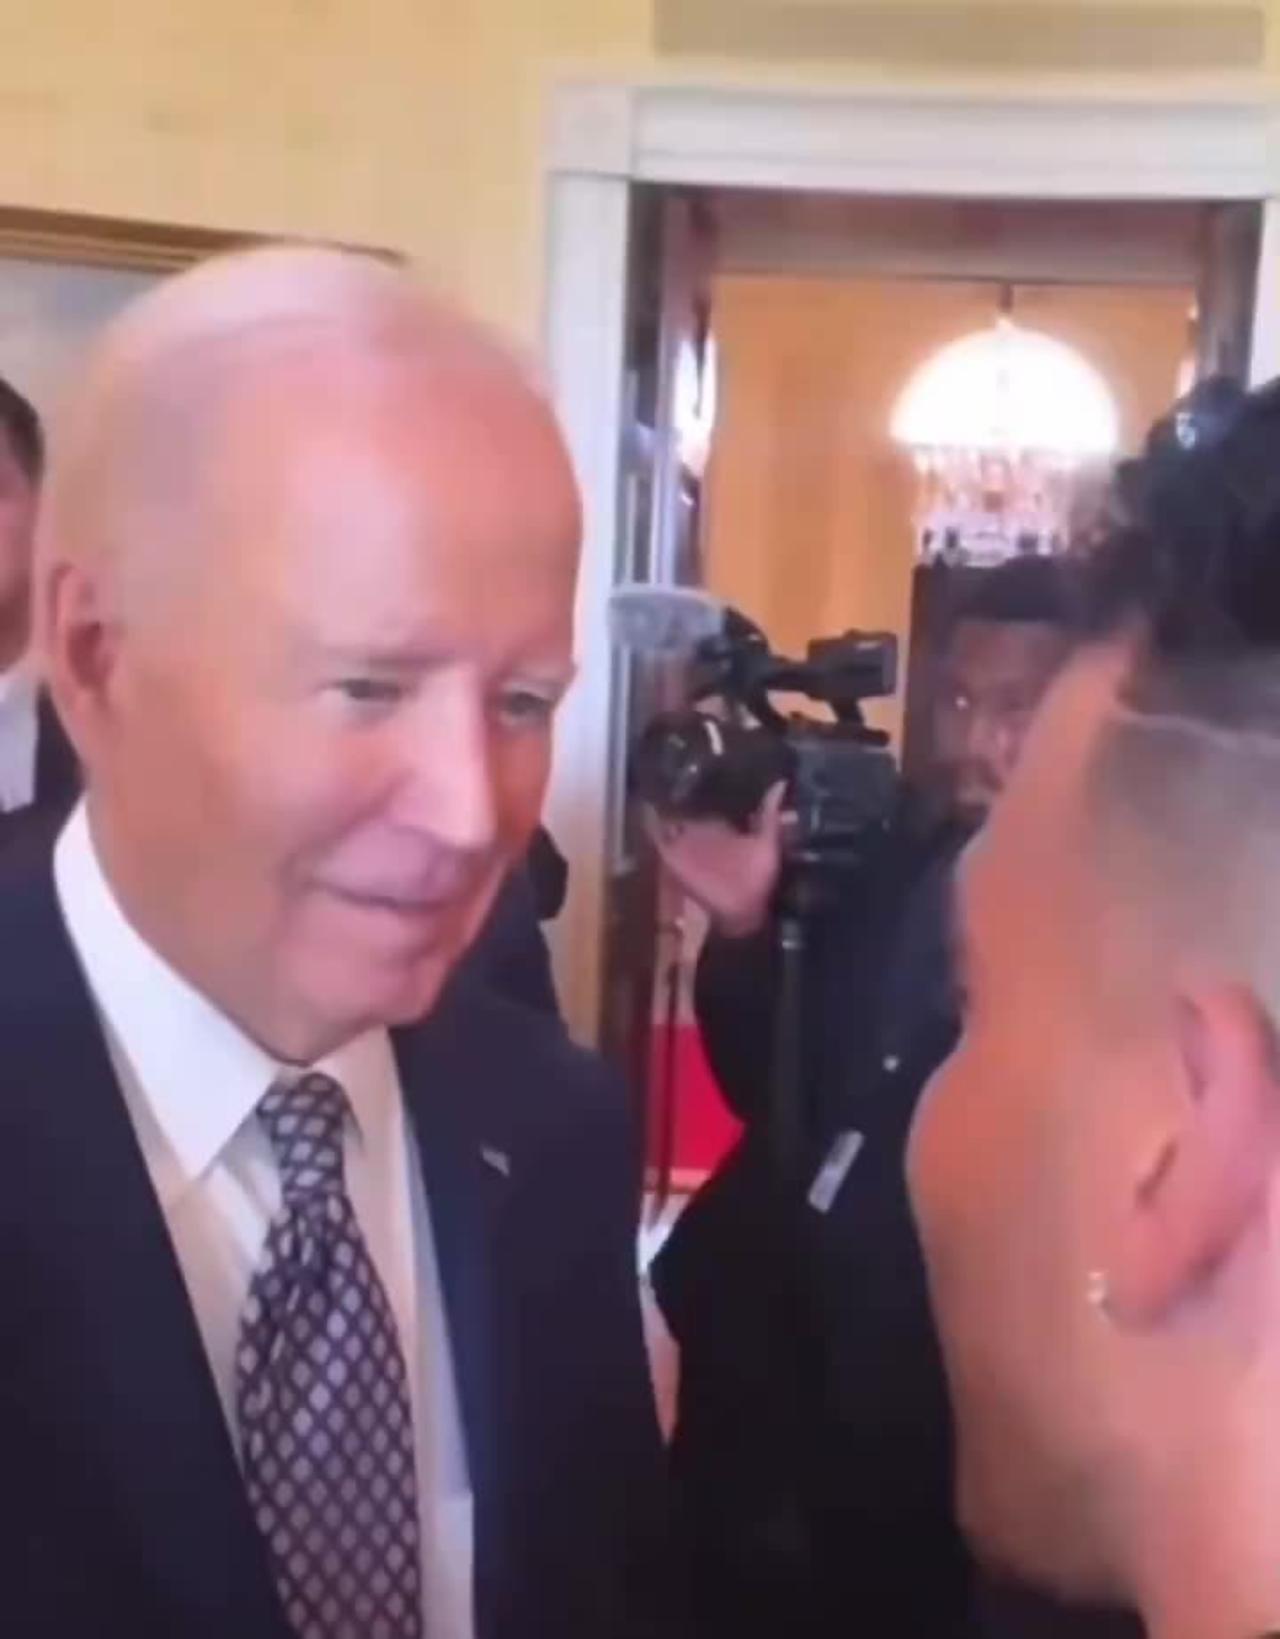 STUNNING unscripted Biden exchange caught on video... this is insane